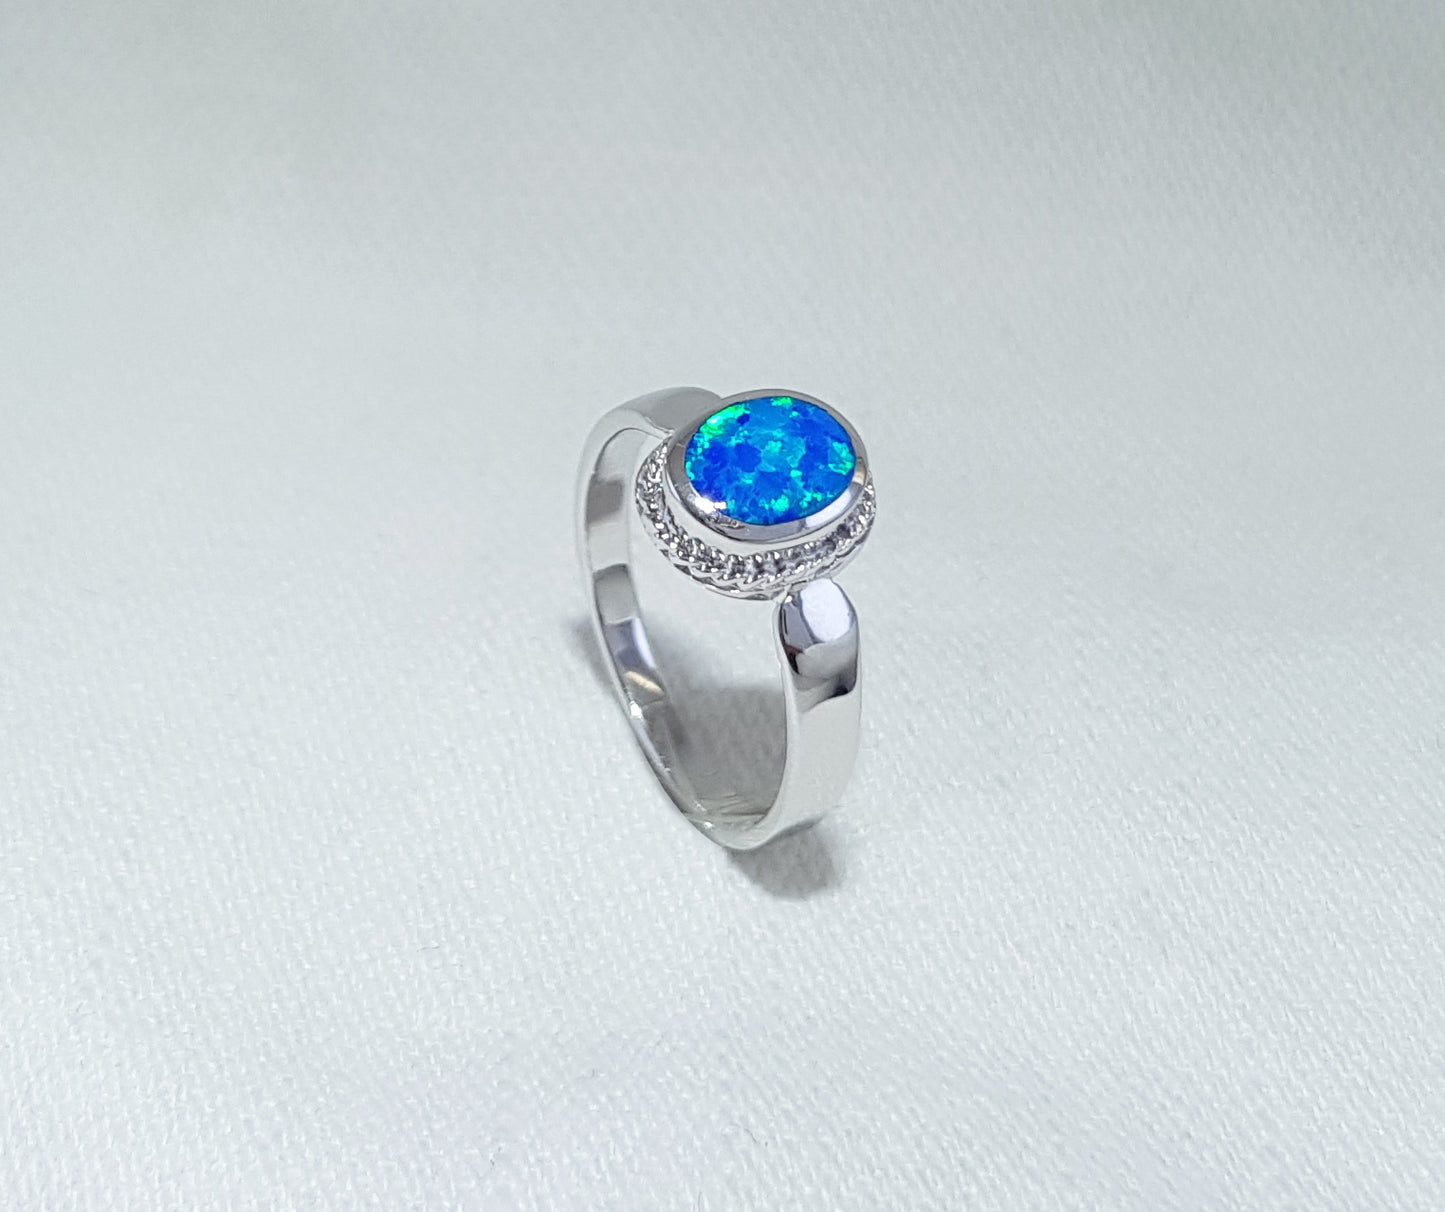 Sterling Silver Ring with Crushed Opal Inlay 